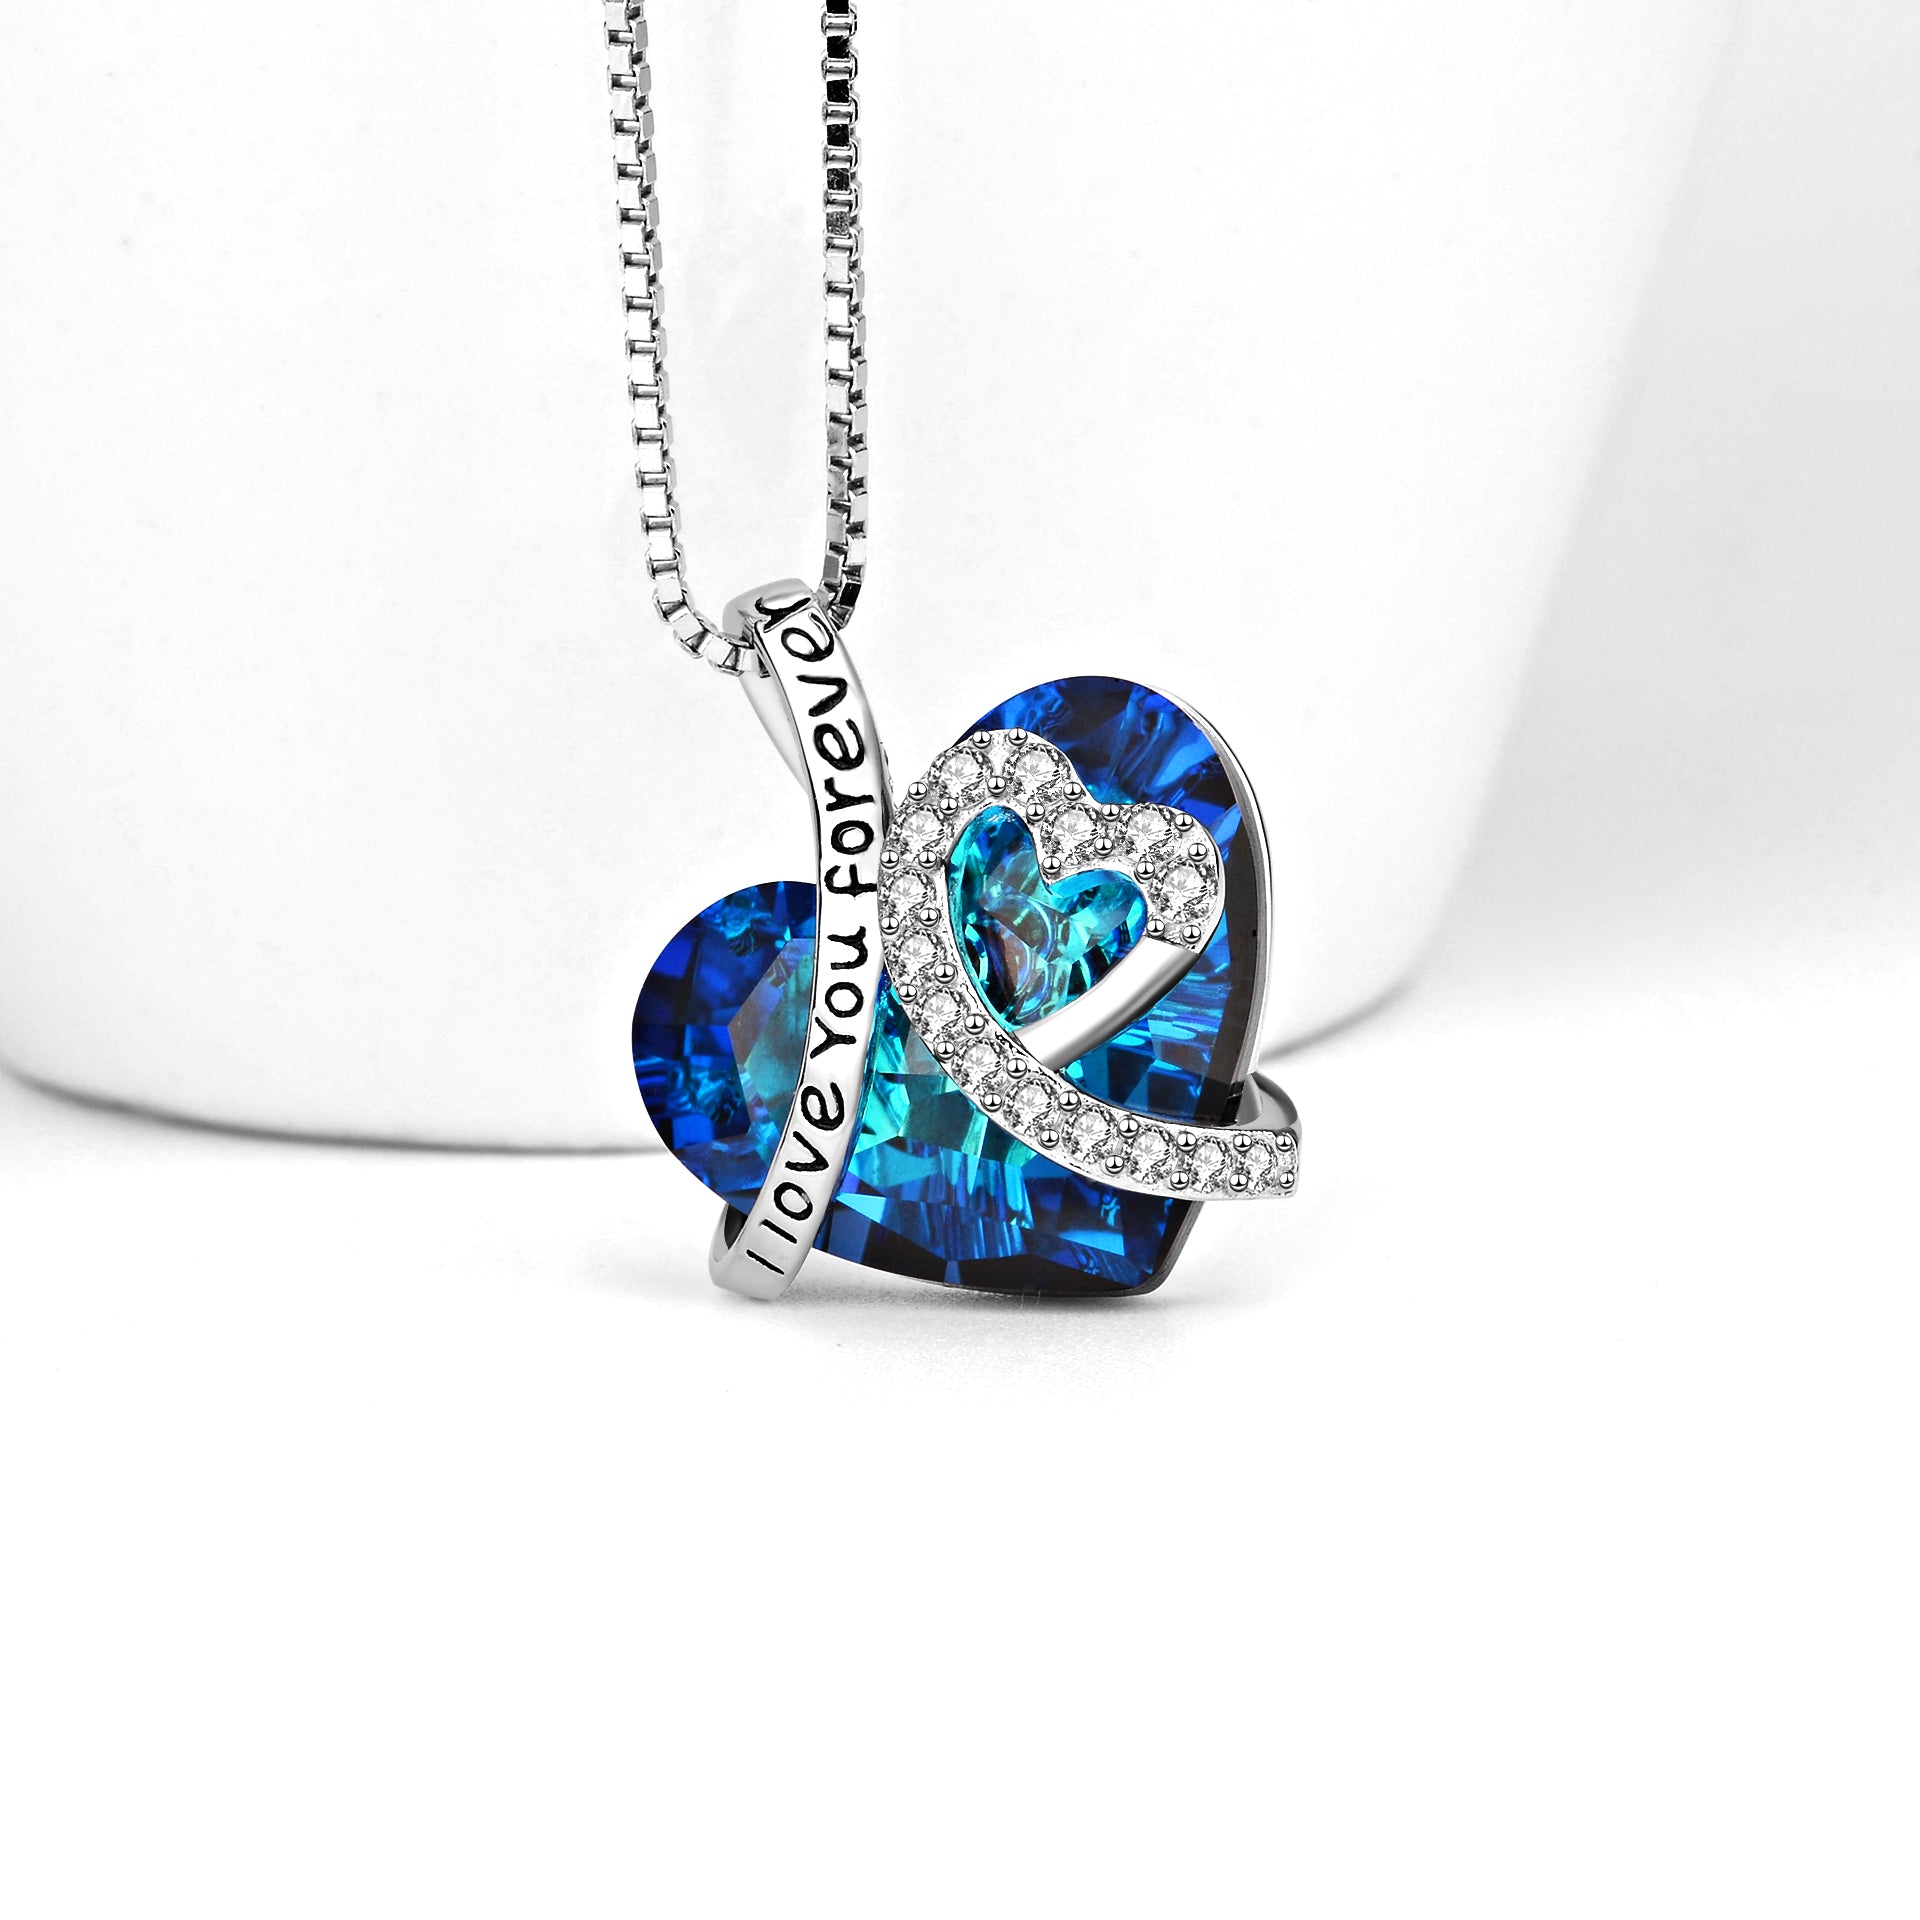 Crystal Heart Pendant Necklace Women Jewelry Necklaces Charms Gift Girl Personality Necklaces